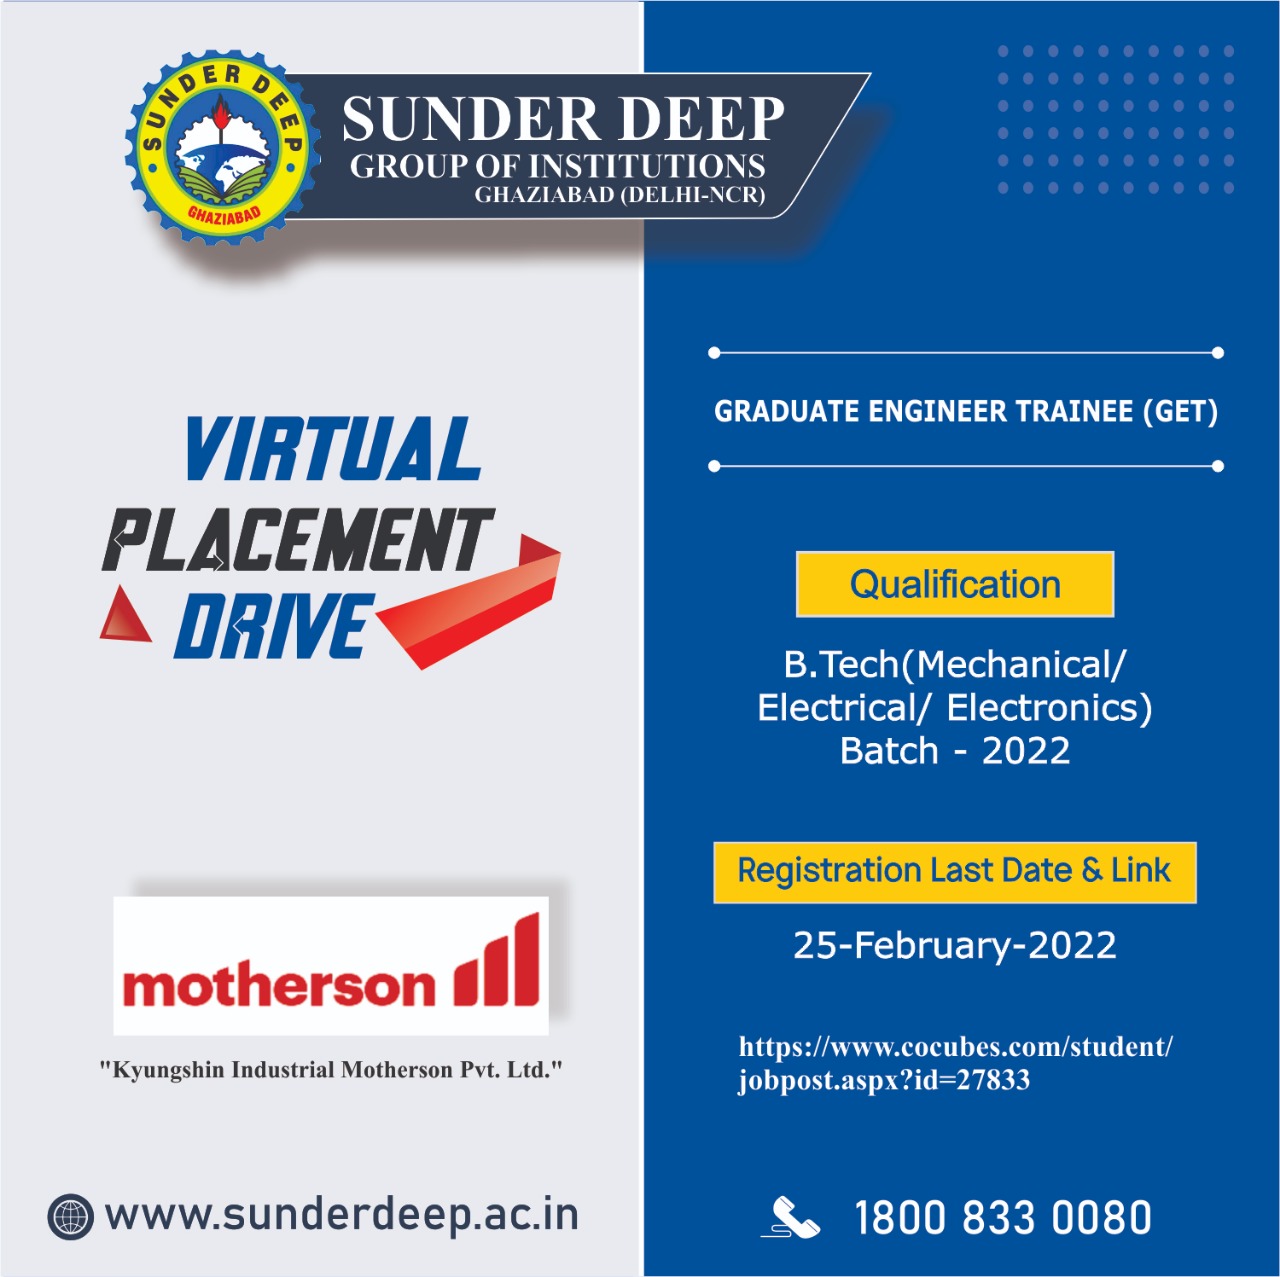 Virtual Placement Drive by Motherson